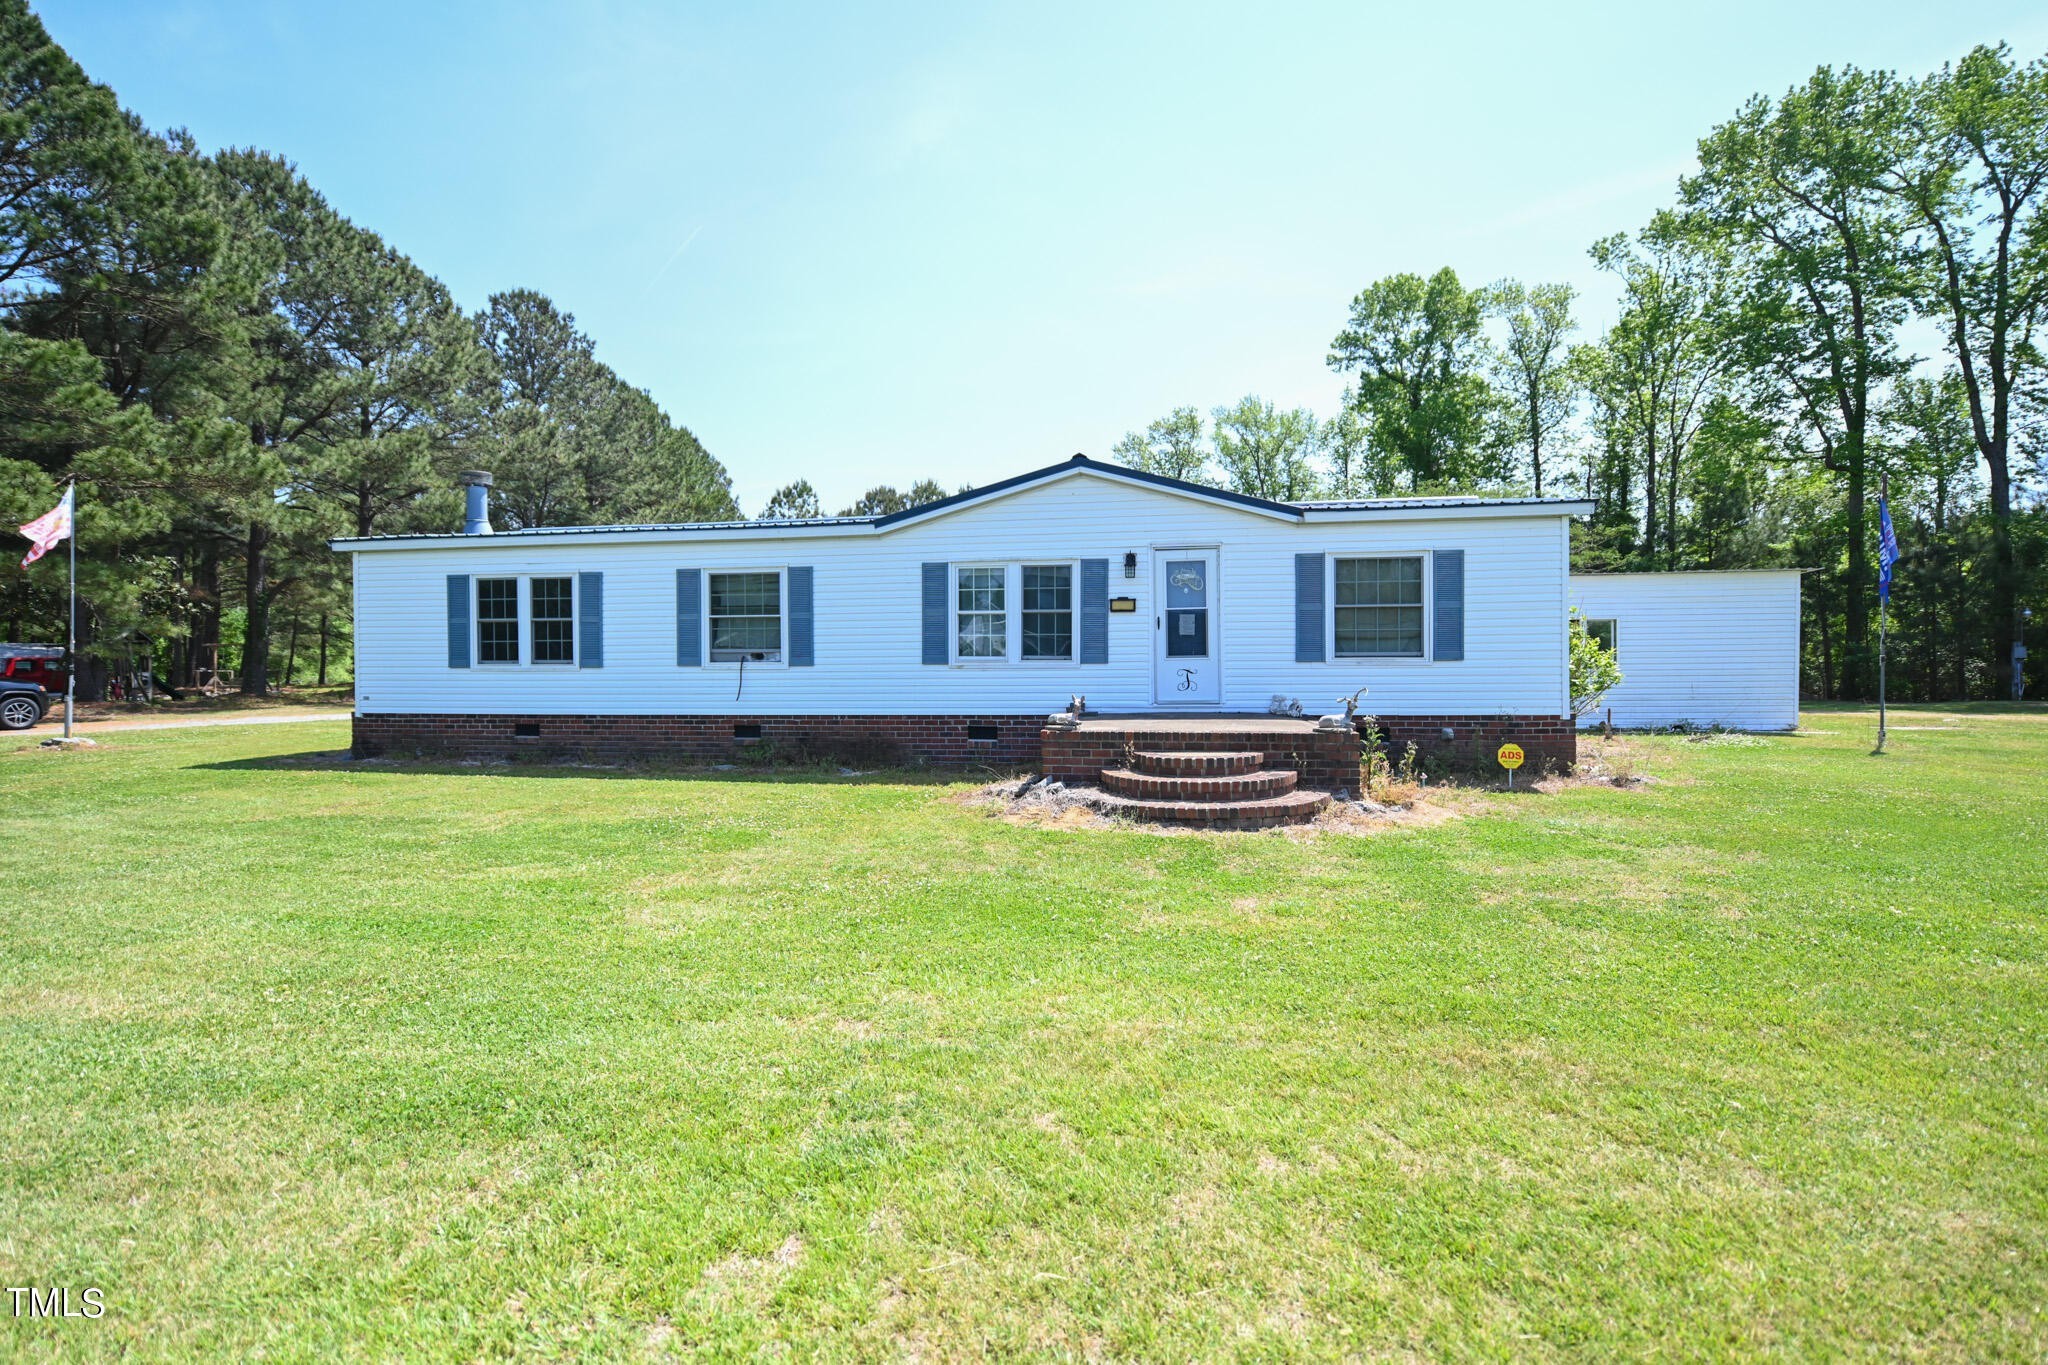 1. 471 Bizzell Braswell Road